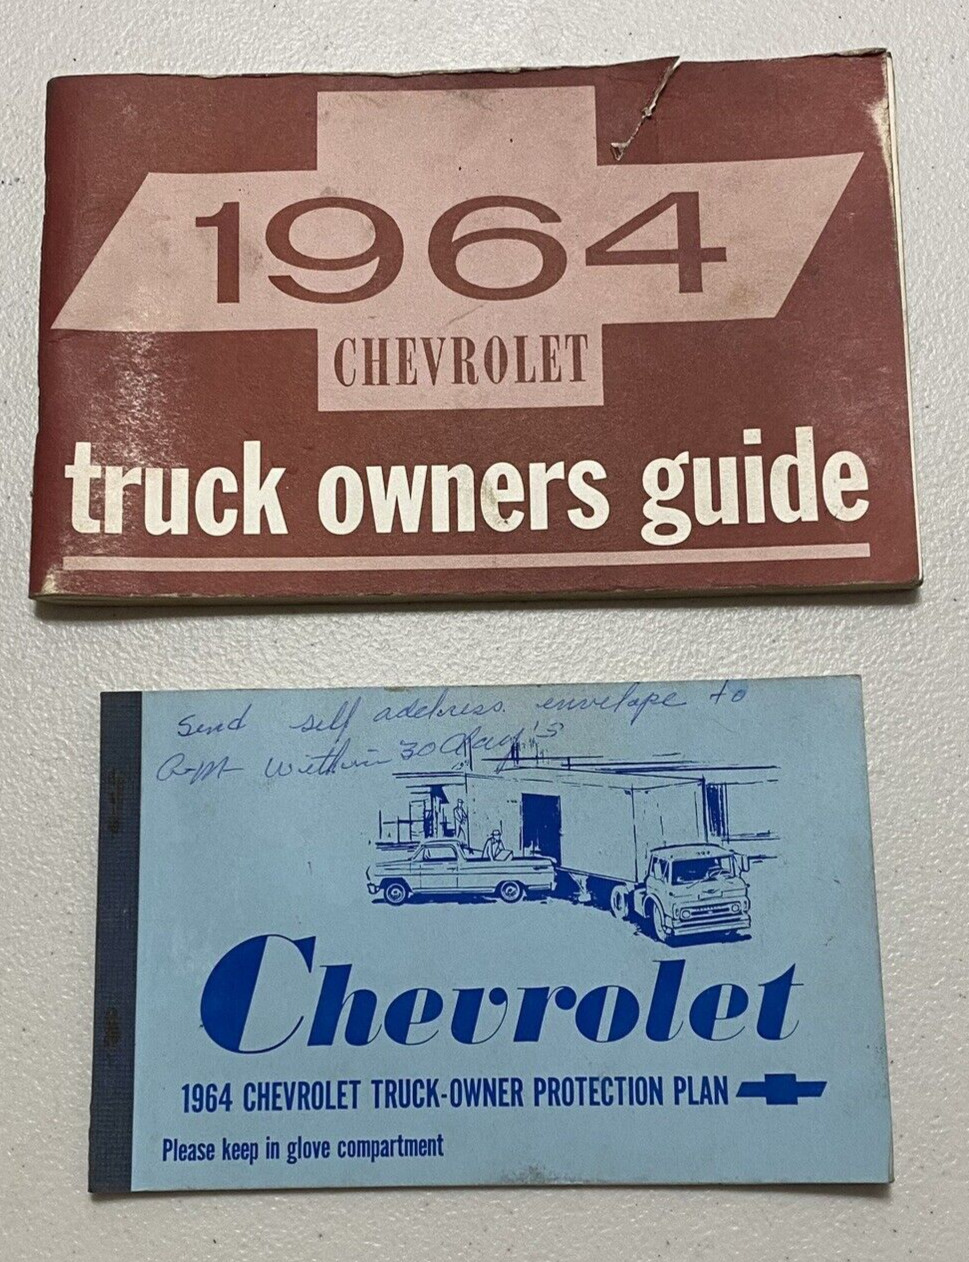 1964 CHEVROLET CHEVY TRUCK OWNERS GUIDE & PROTECTION PLAN MANUALS